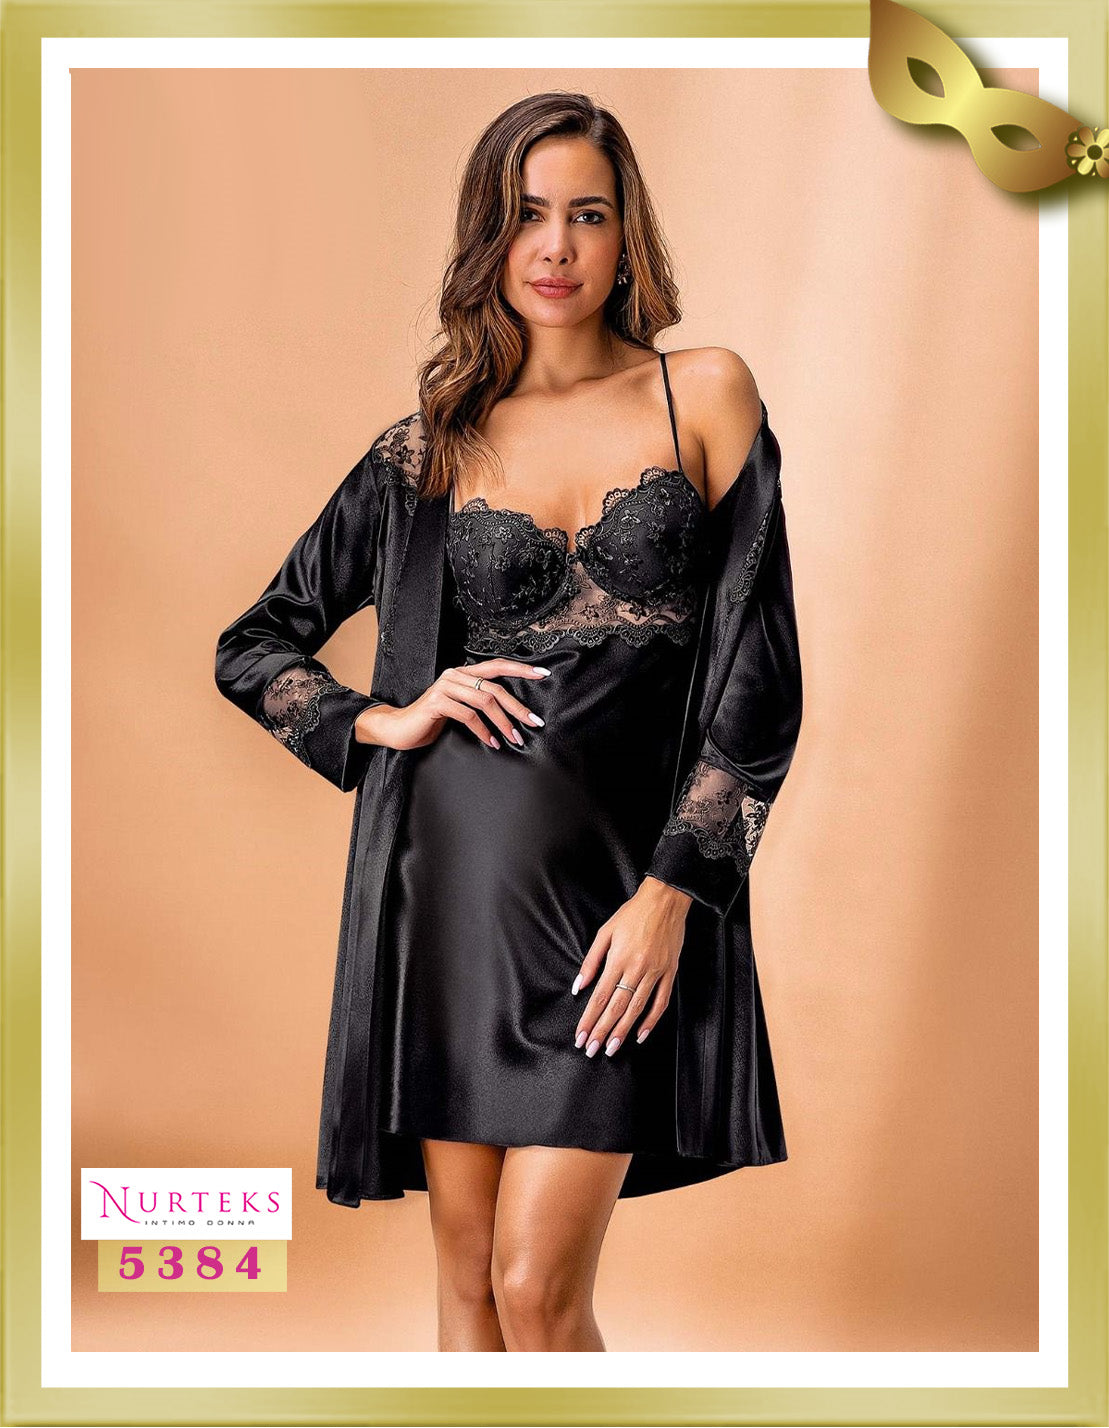 Nurteks Lingerie Satin with Lace Lingerie Nightgown with Robe Set 5384 Black